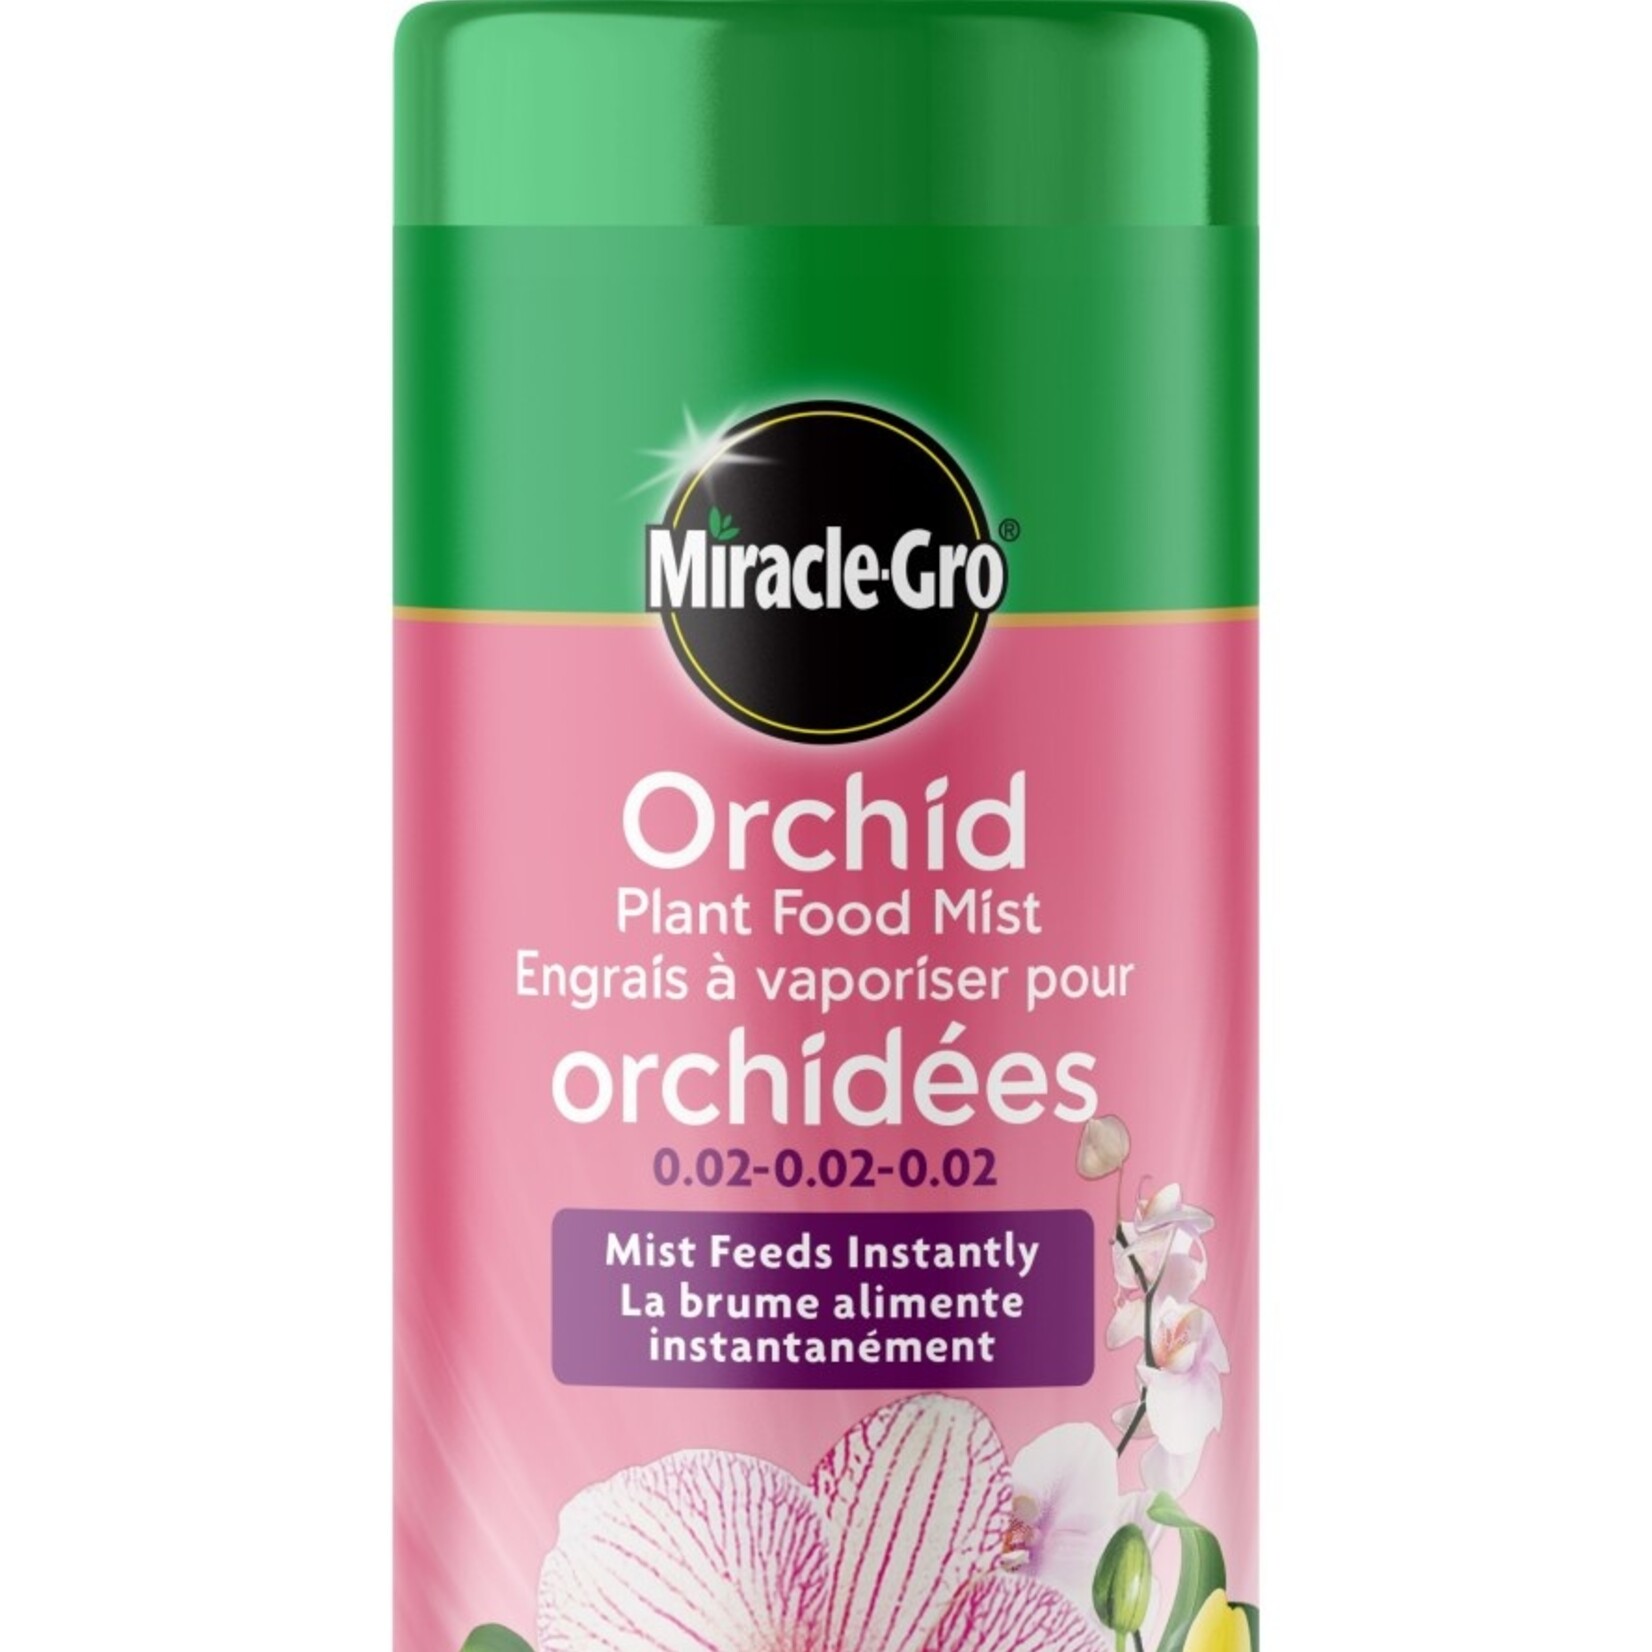 Miracle Gro Miracle-Gro Orchid Plant Food Mist  0.02-0.02-0.02   236mL